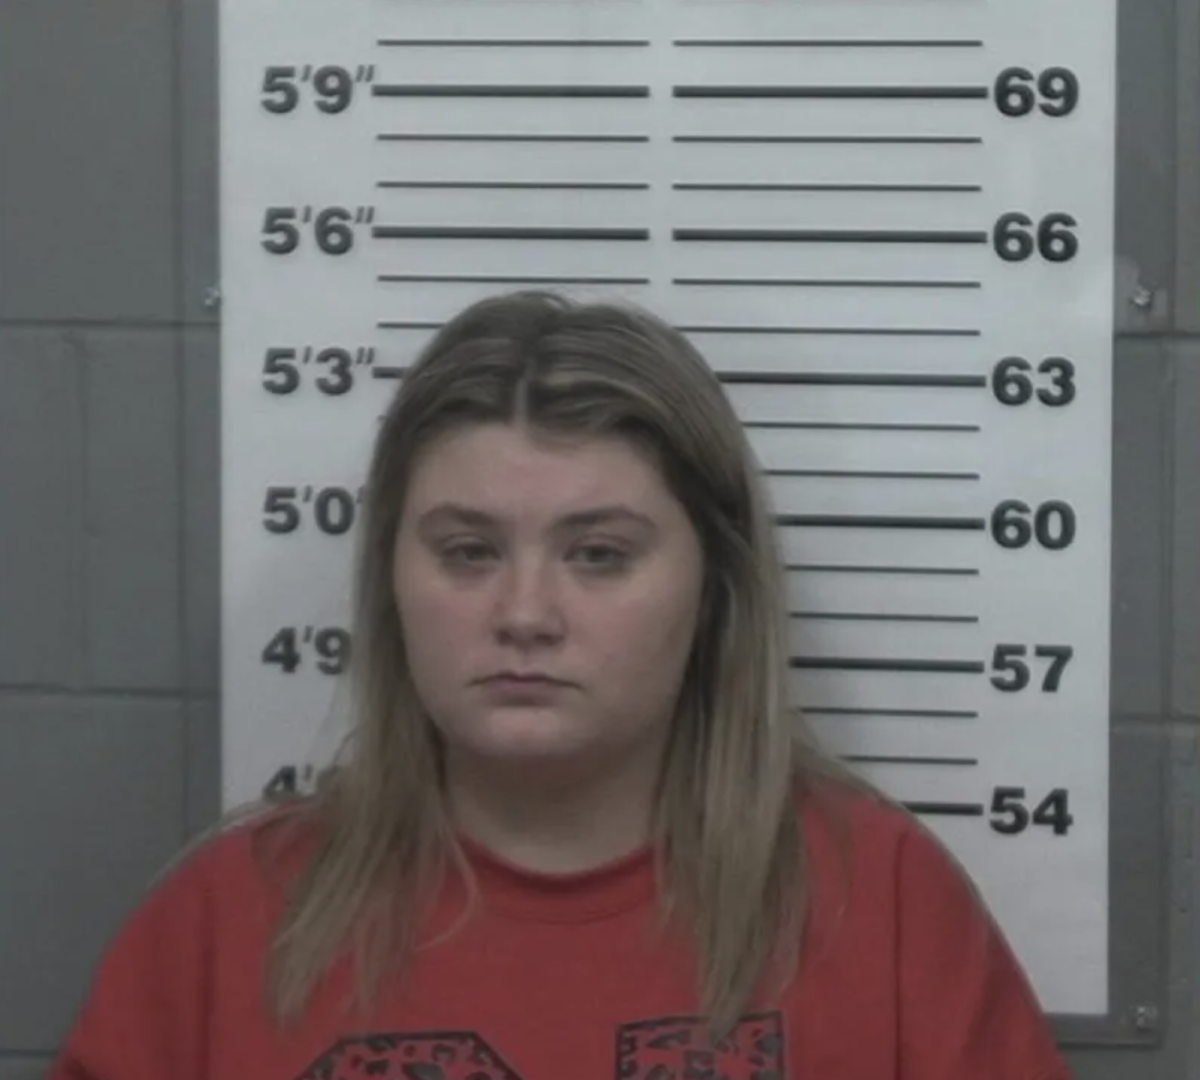 Teen Pageant Queen Arrested and Charged in Toddler's Tragic Passing | An 18-year-old pageant queen has been arrested and charged with the murder of a toddler.